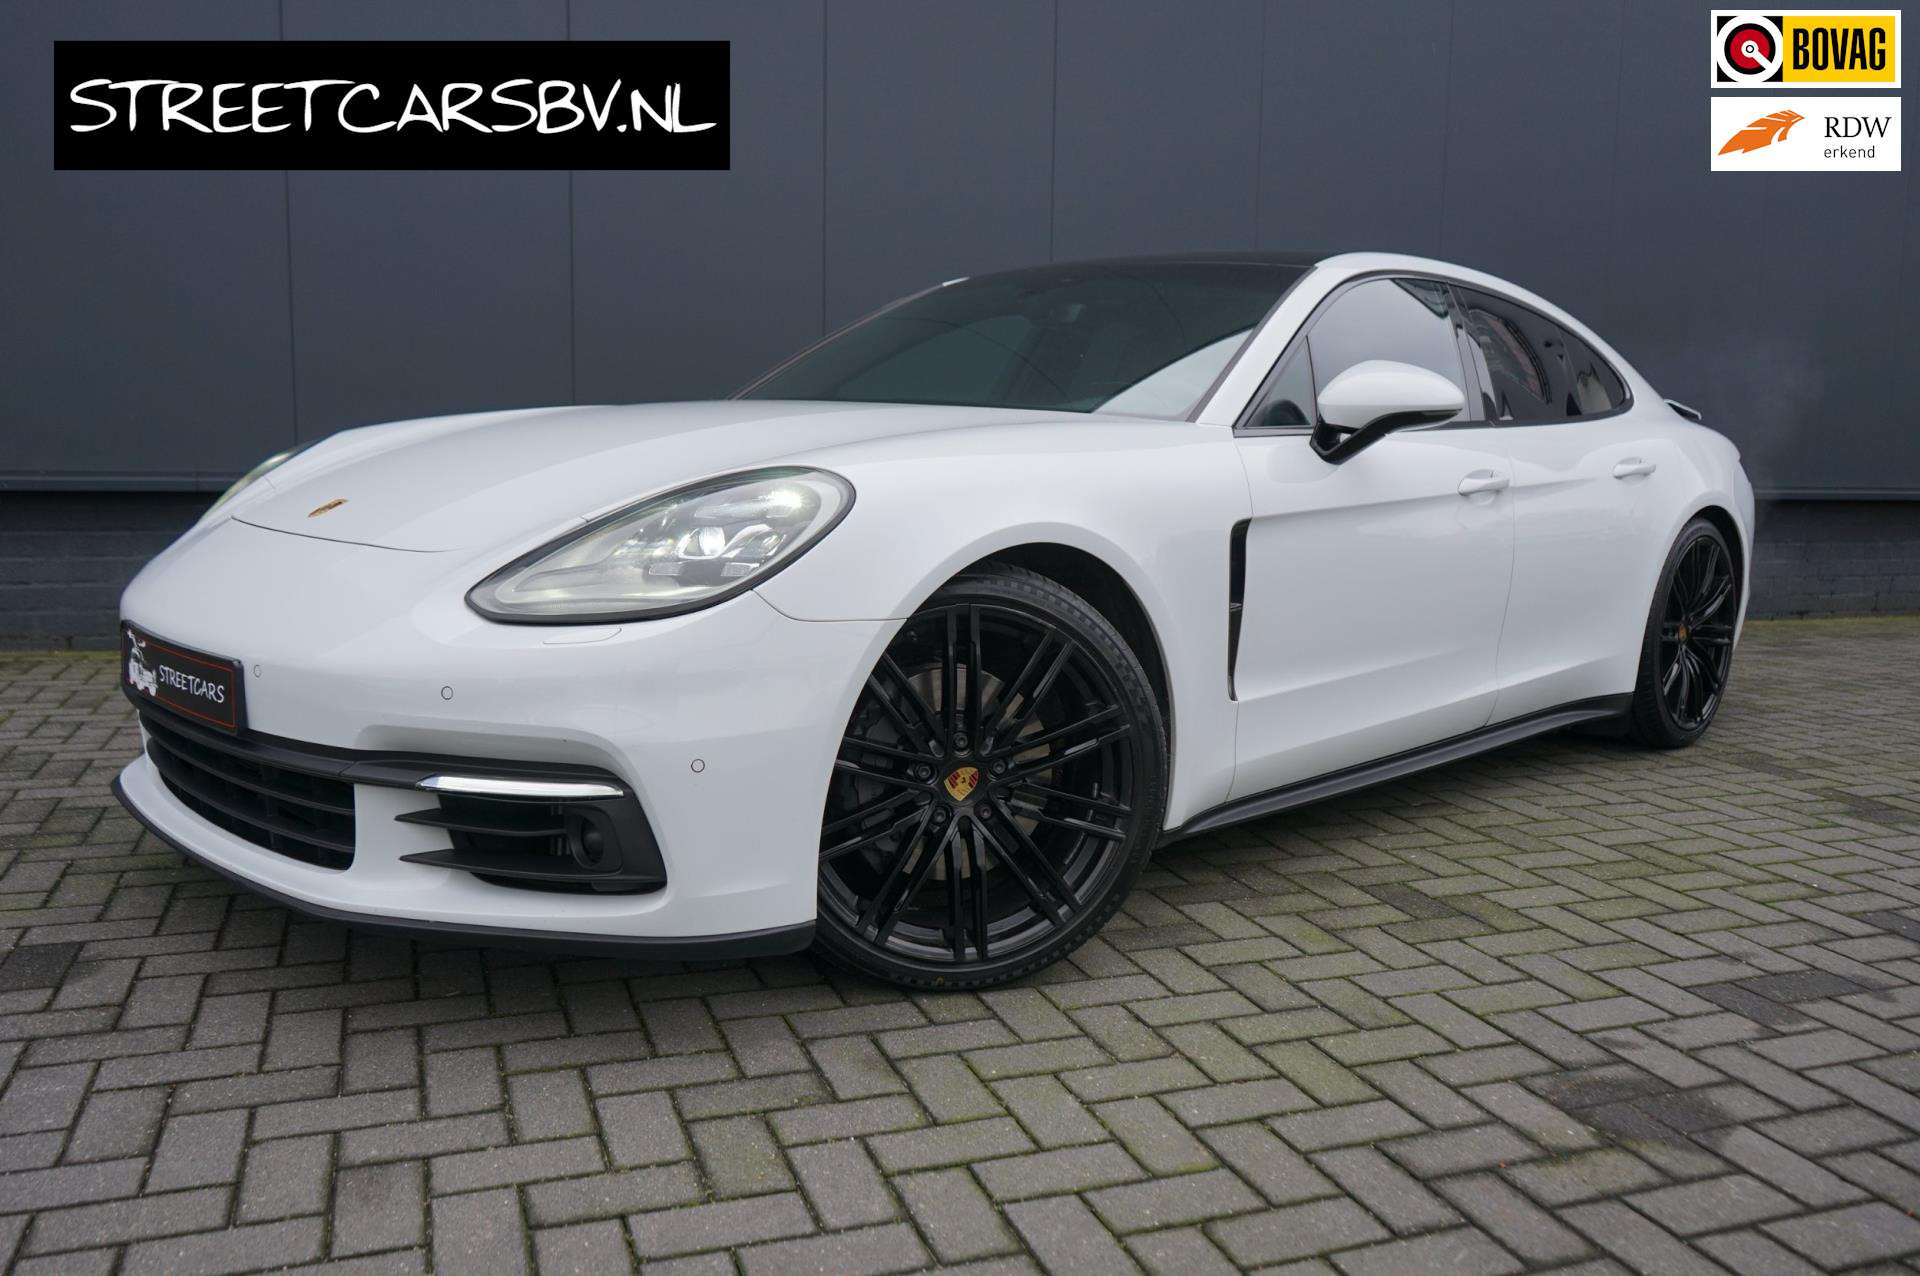 Porsche Panamera Compact in White used in NIEUWKUIJK for € 59,950.-